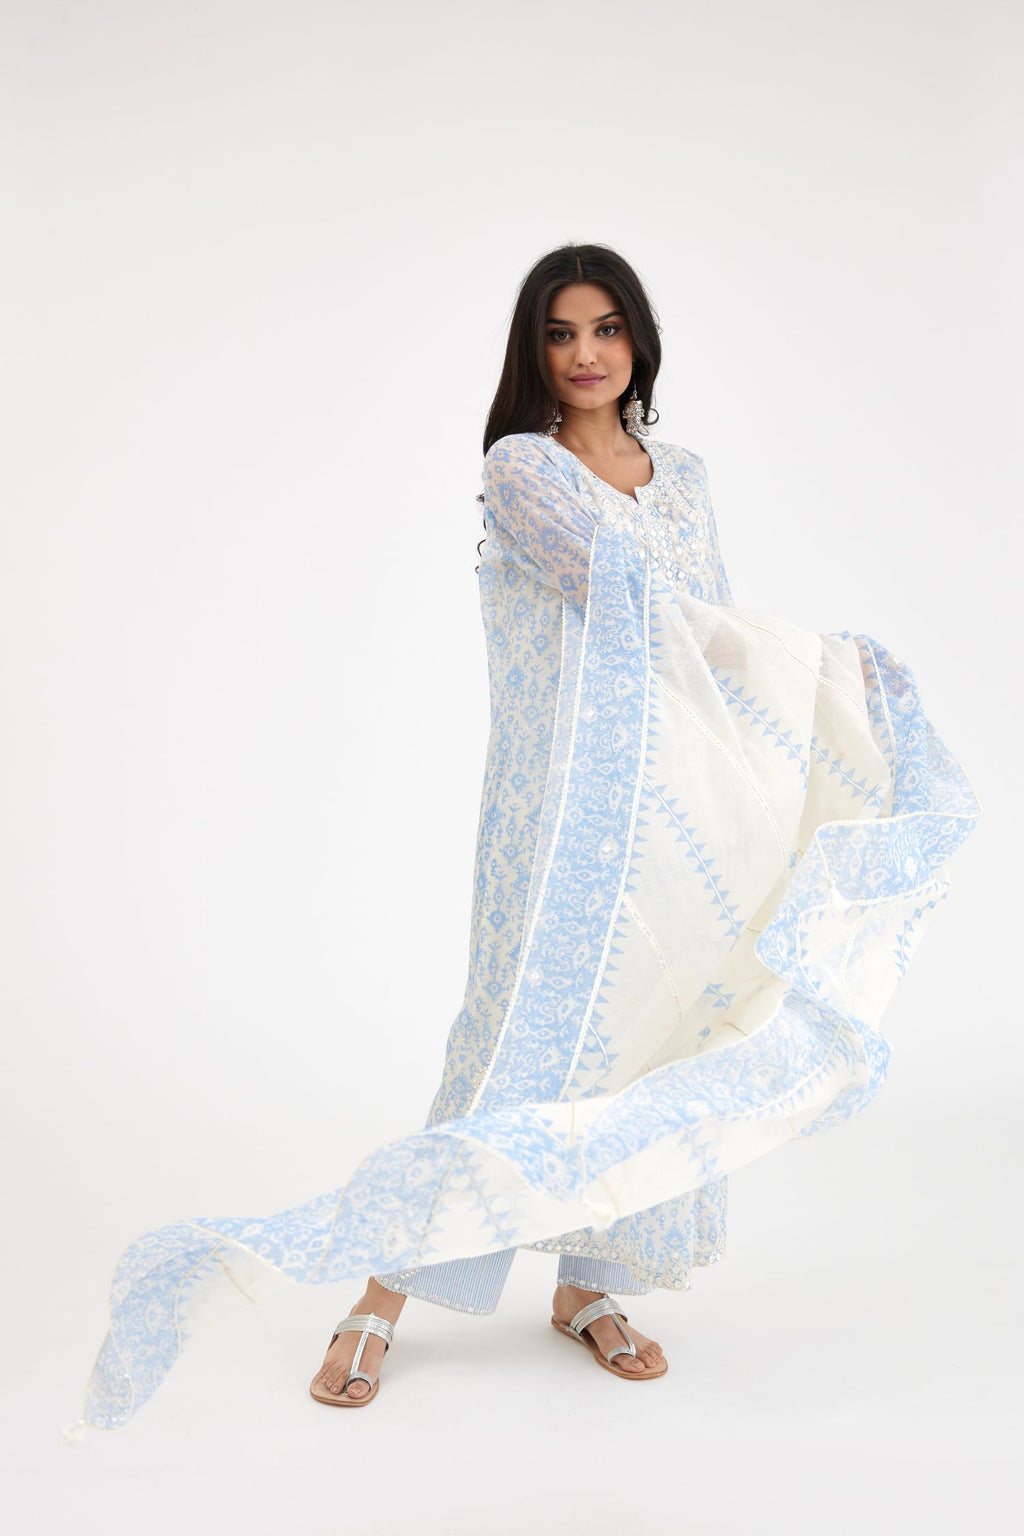 Ikat design blue and off white hand block-printed Cotton Chanderi straight long kurta set dress with off-white thread and mirror embroidery.